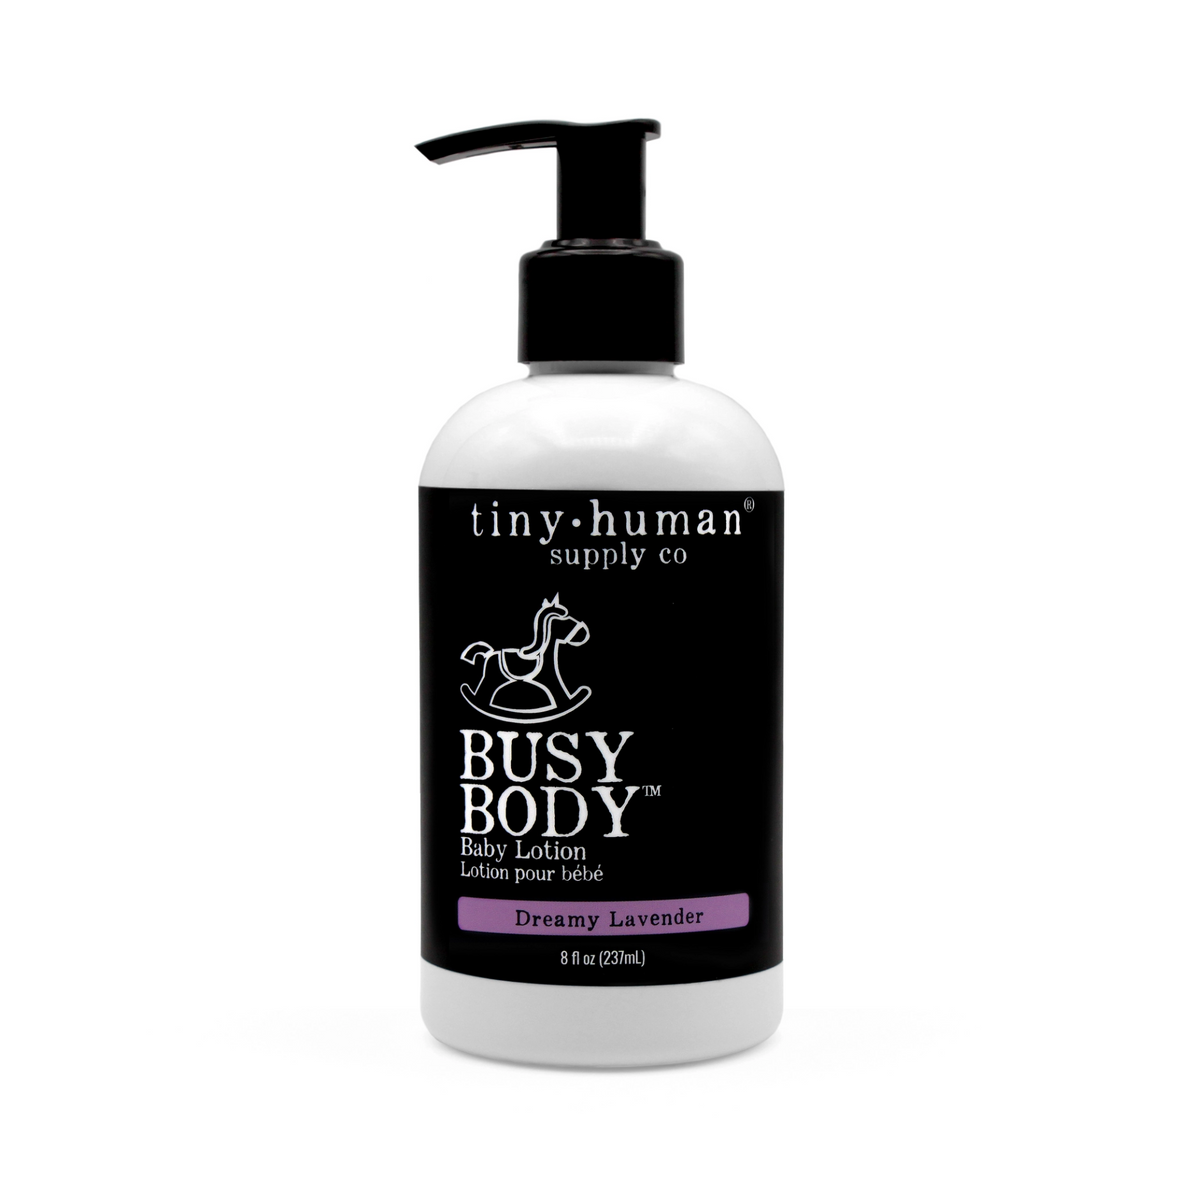 Busy Body Baby Lotion in Lavender